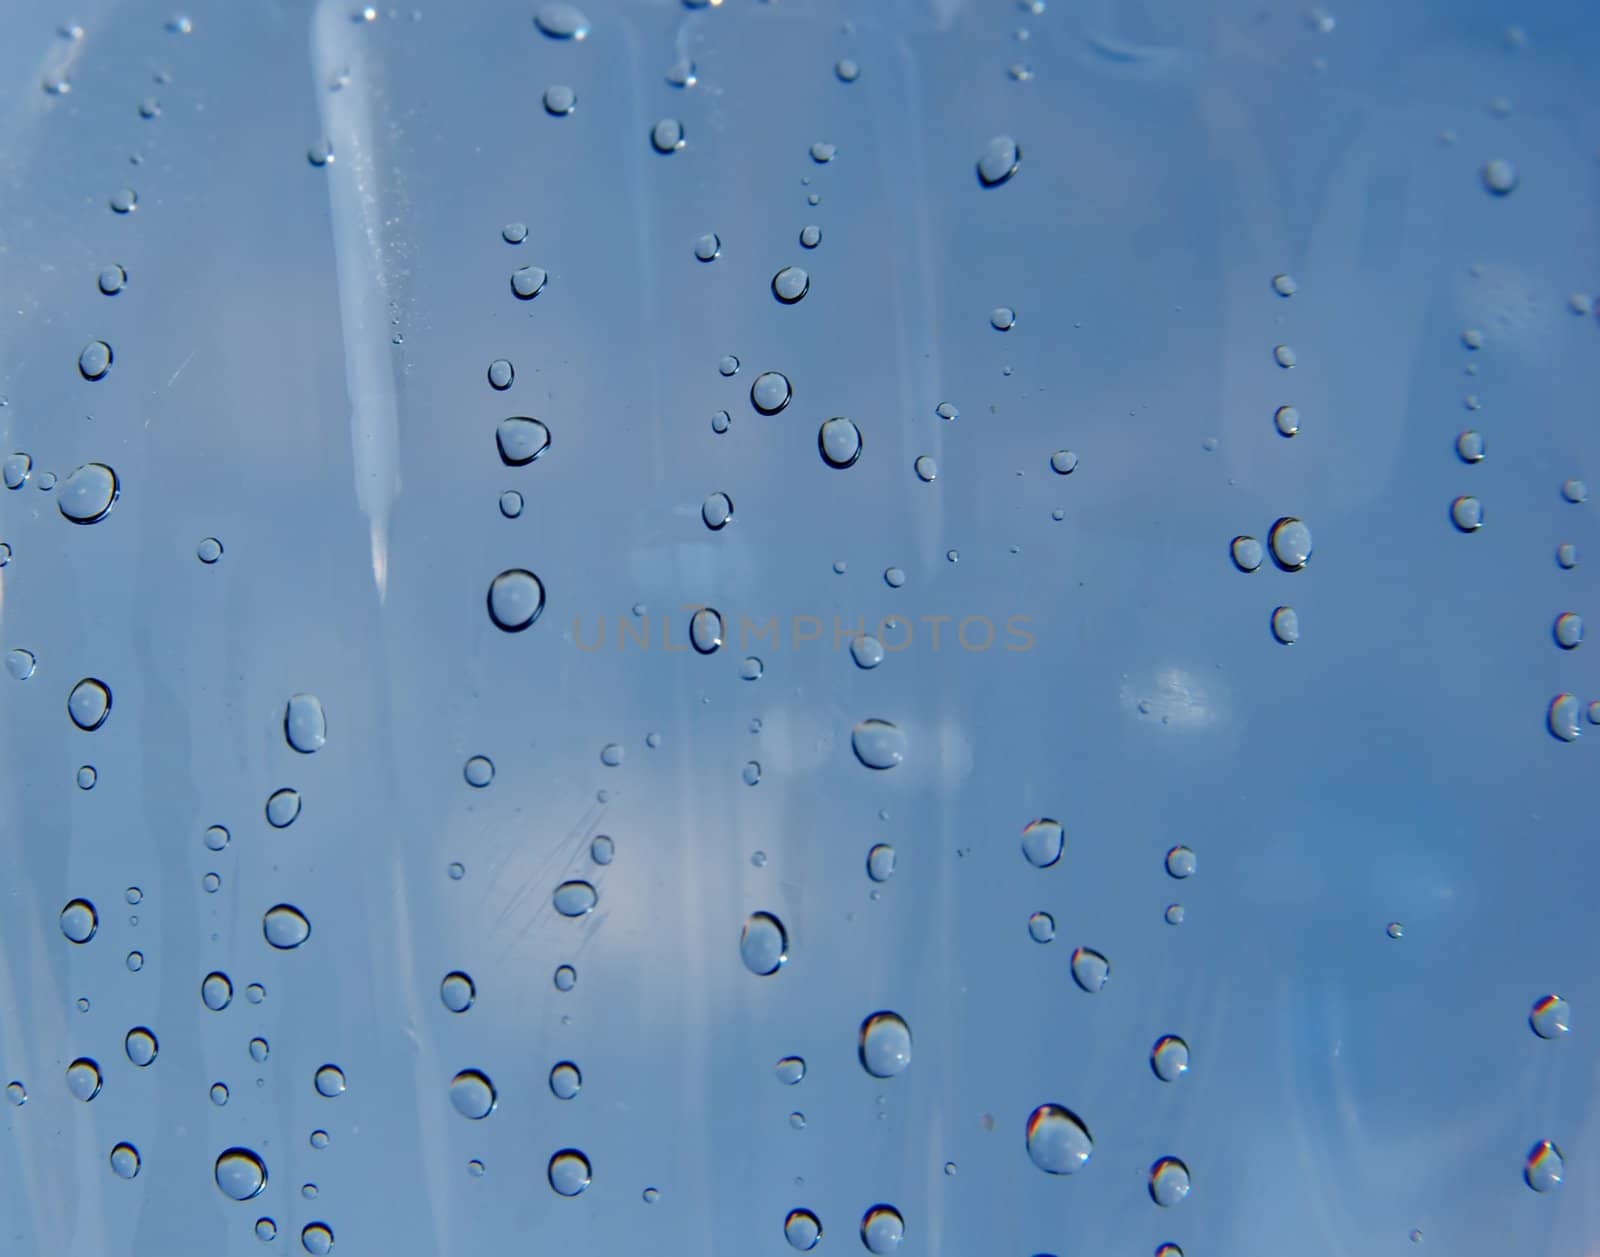 Many small droplets on a transparent blue surface